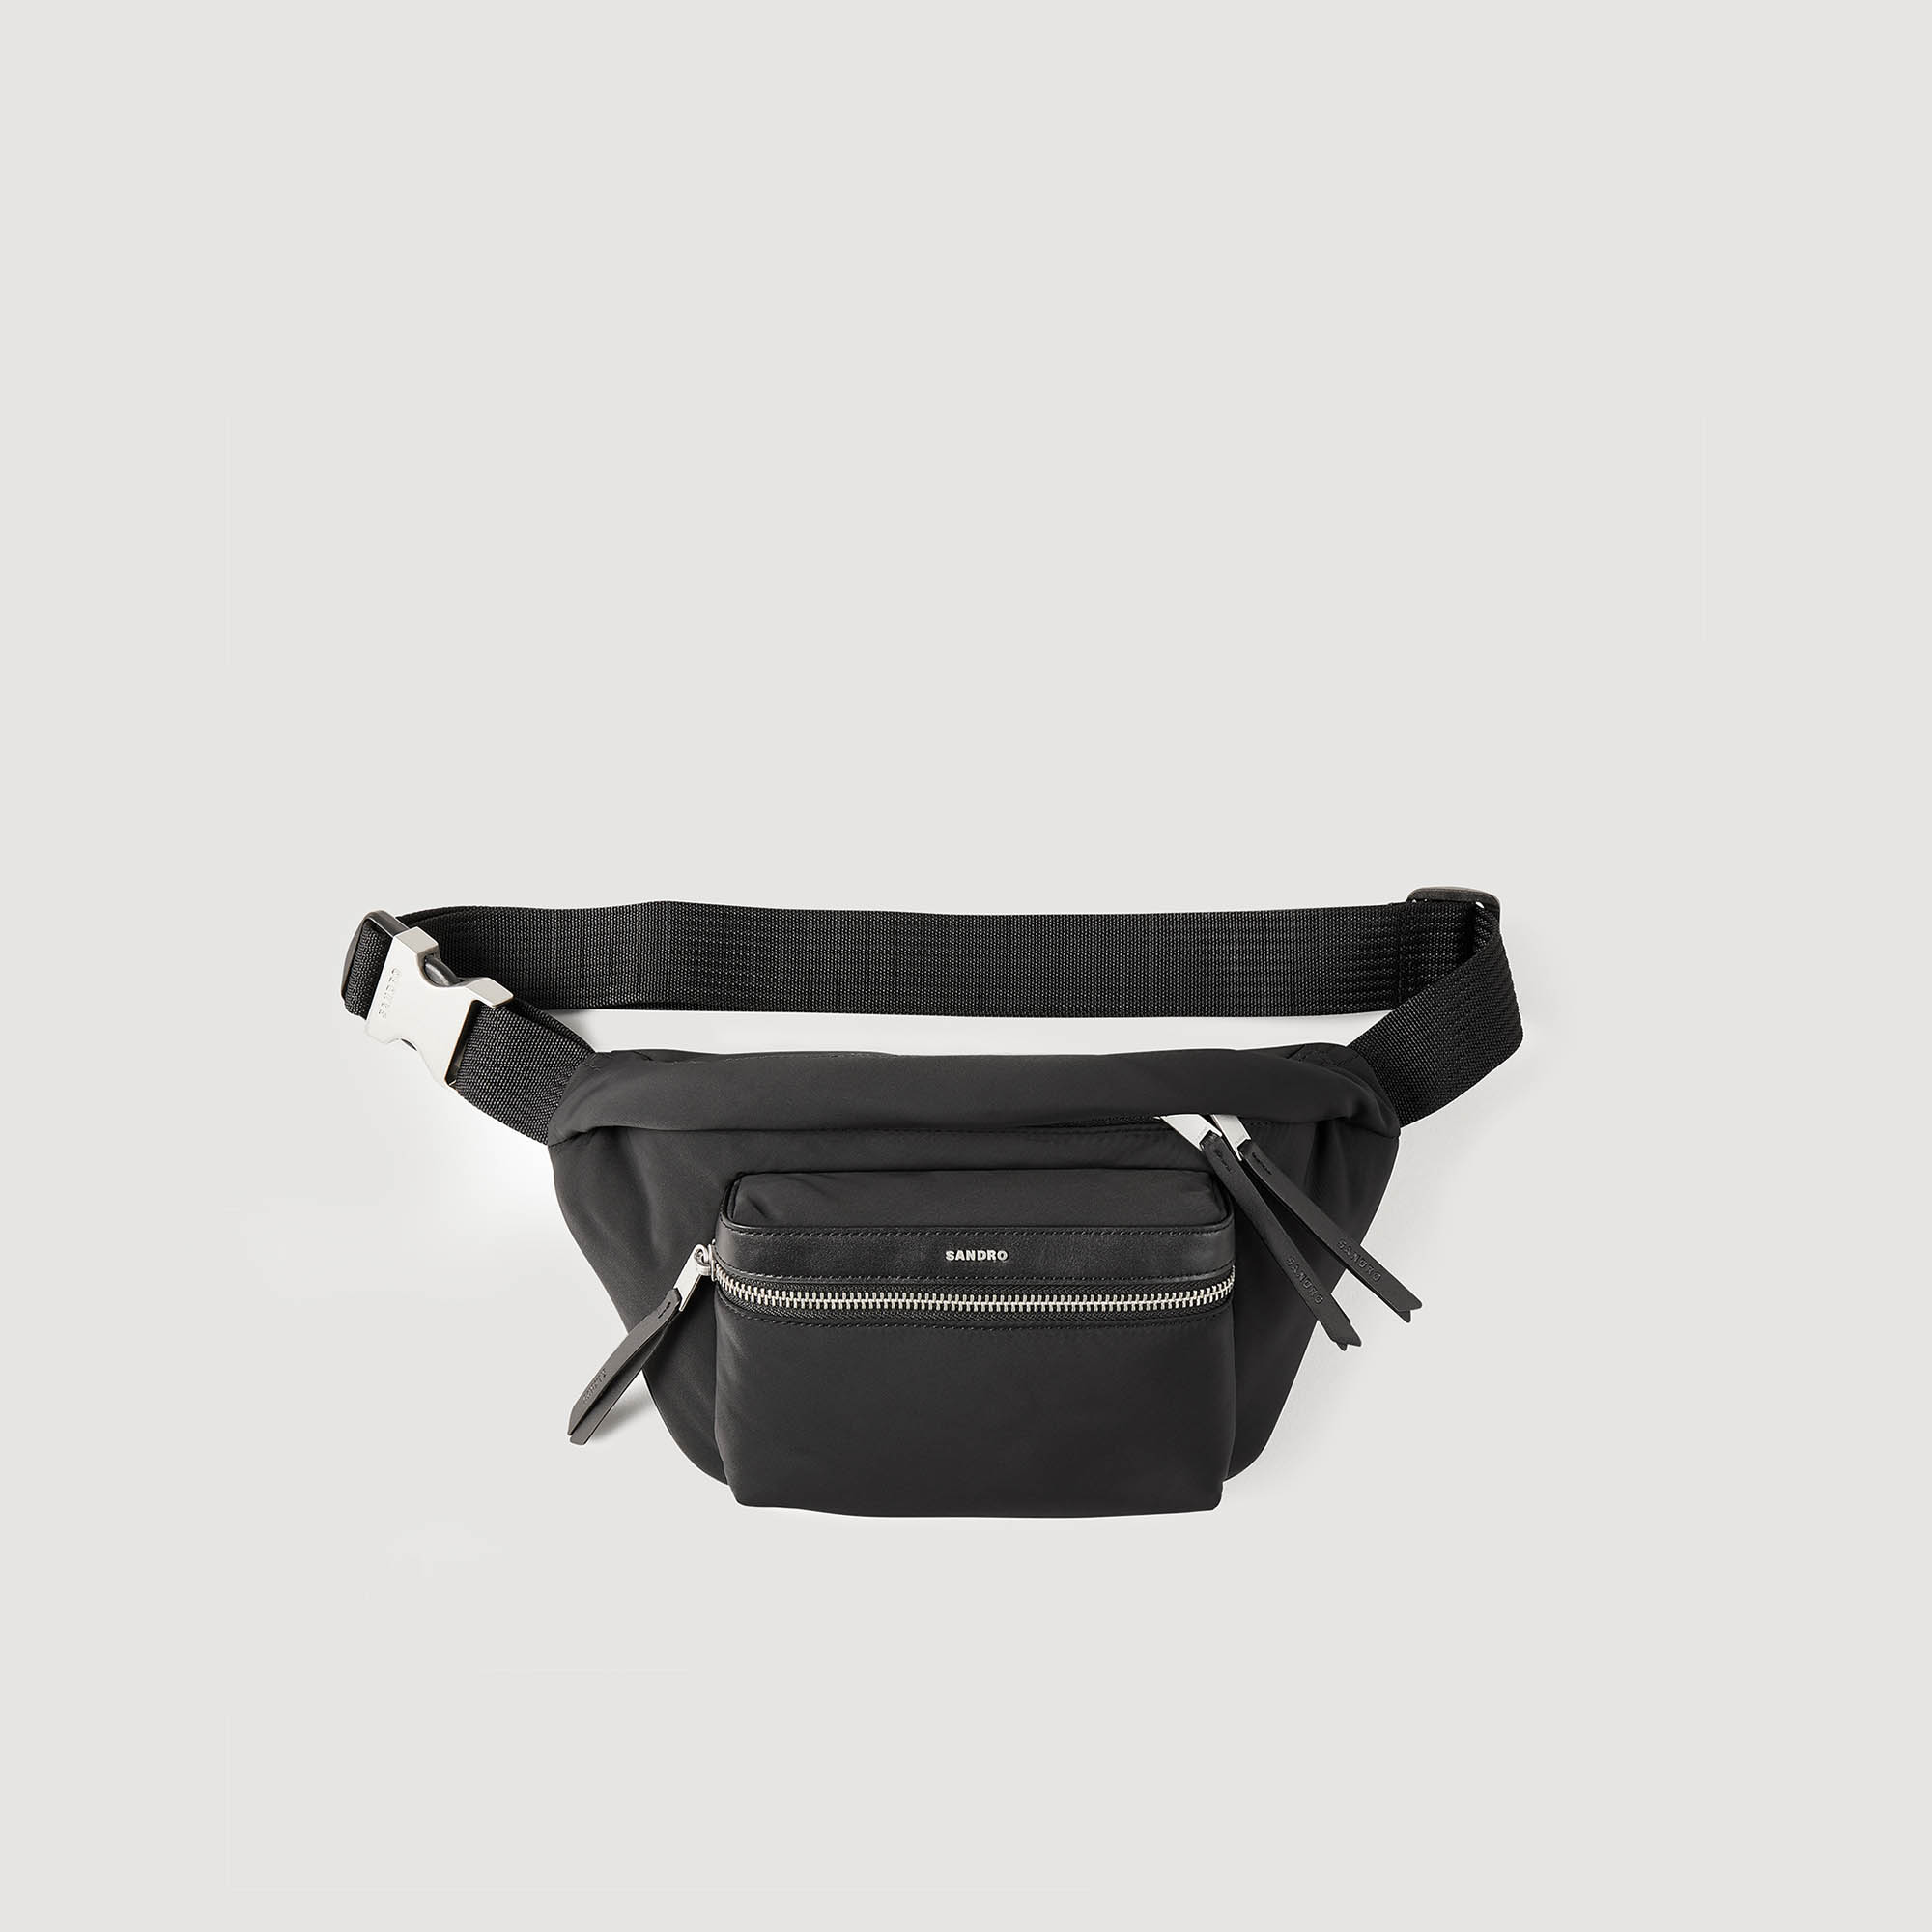 Sandro polyester Lining: Canvas and leather belt bag with zip fastening, front zip pocket with Sandro embossed pull tab, and adjustable belt